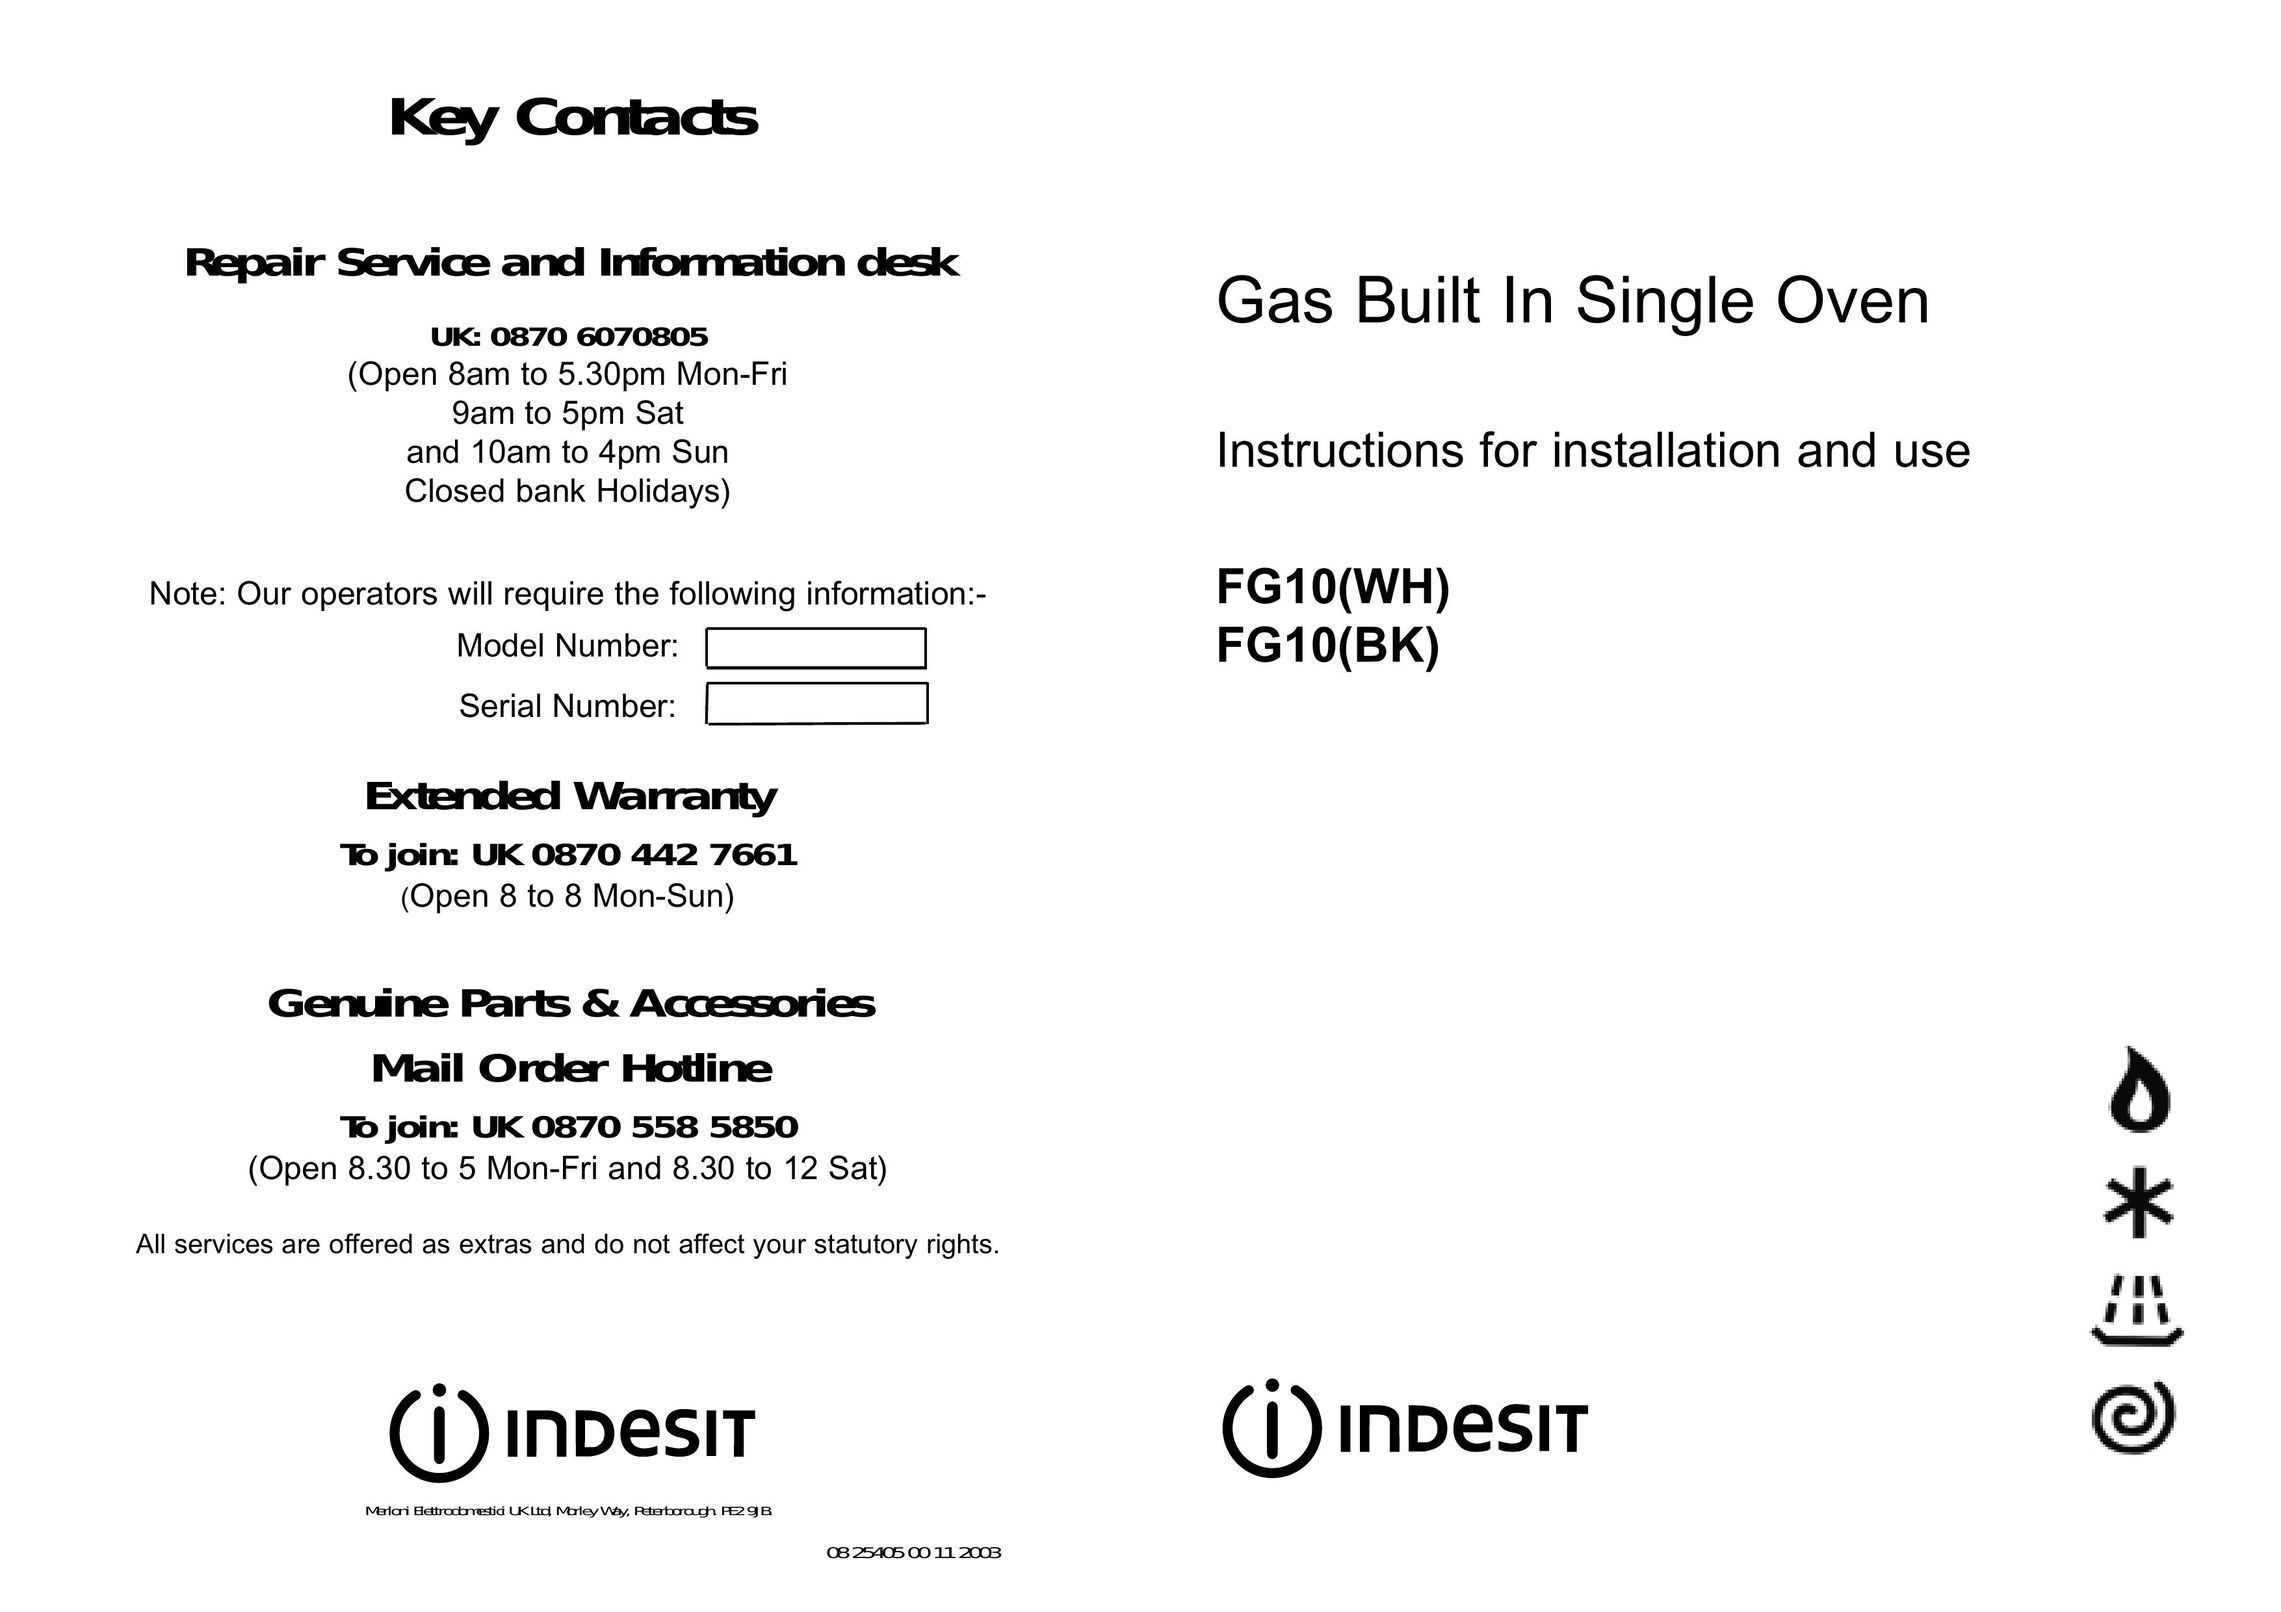 Indesit FG10(WH) Oven User Manual